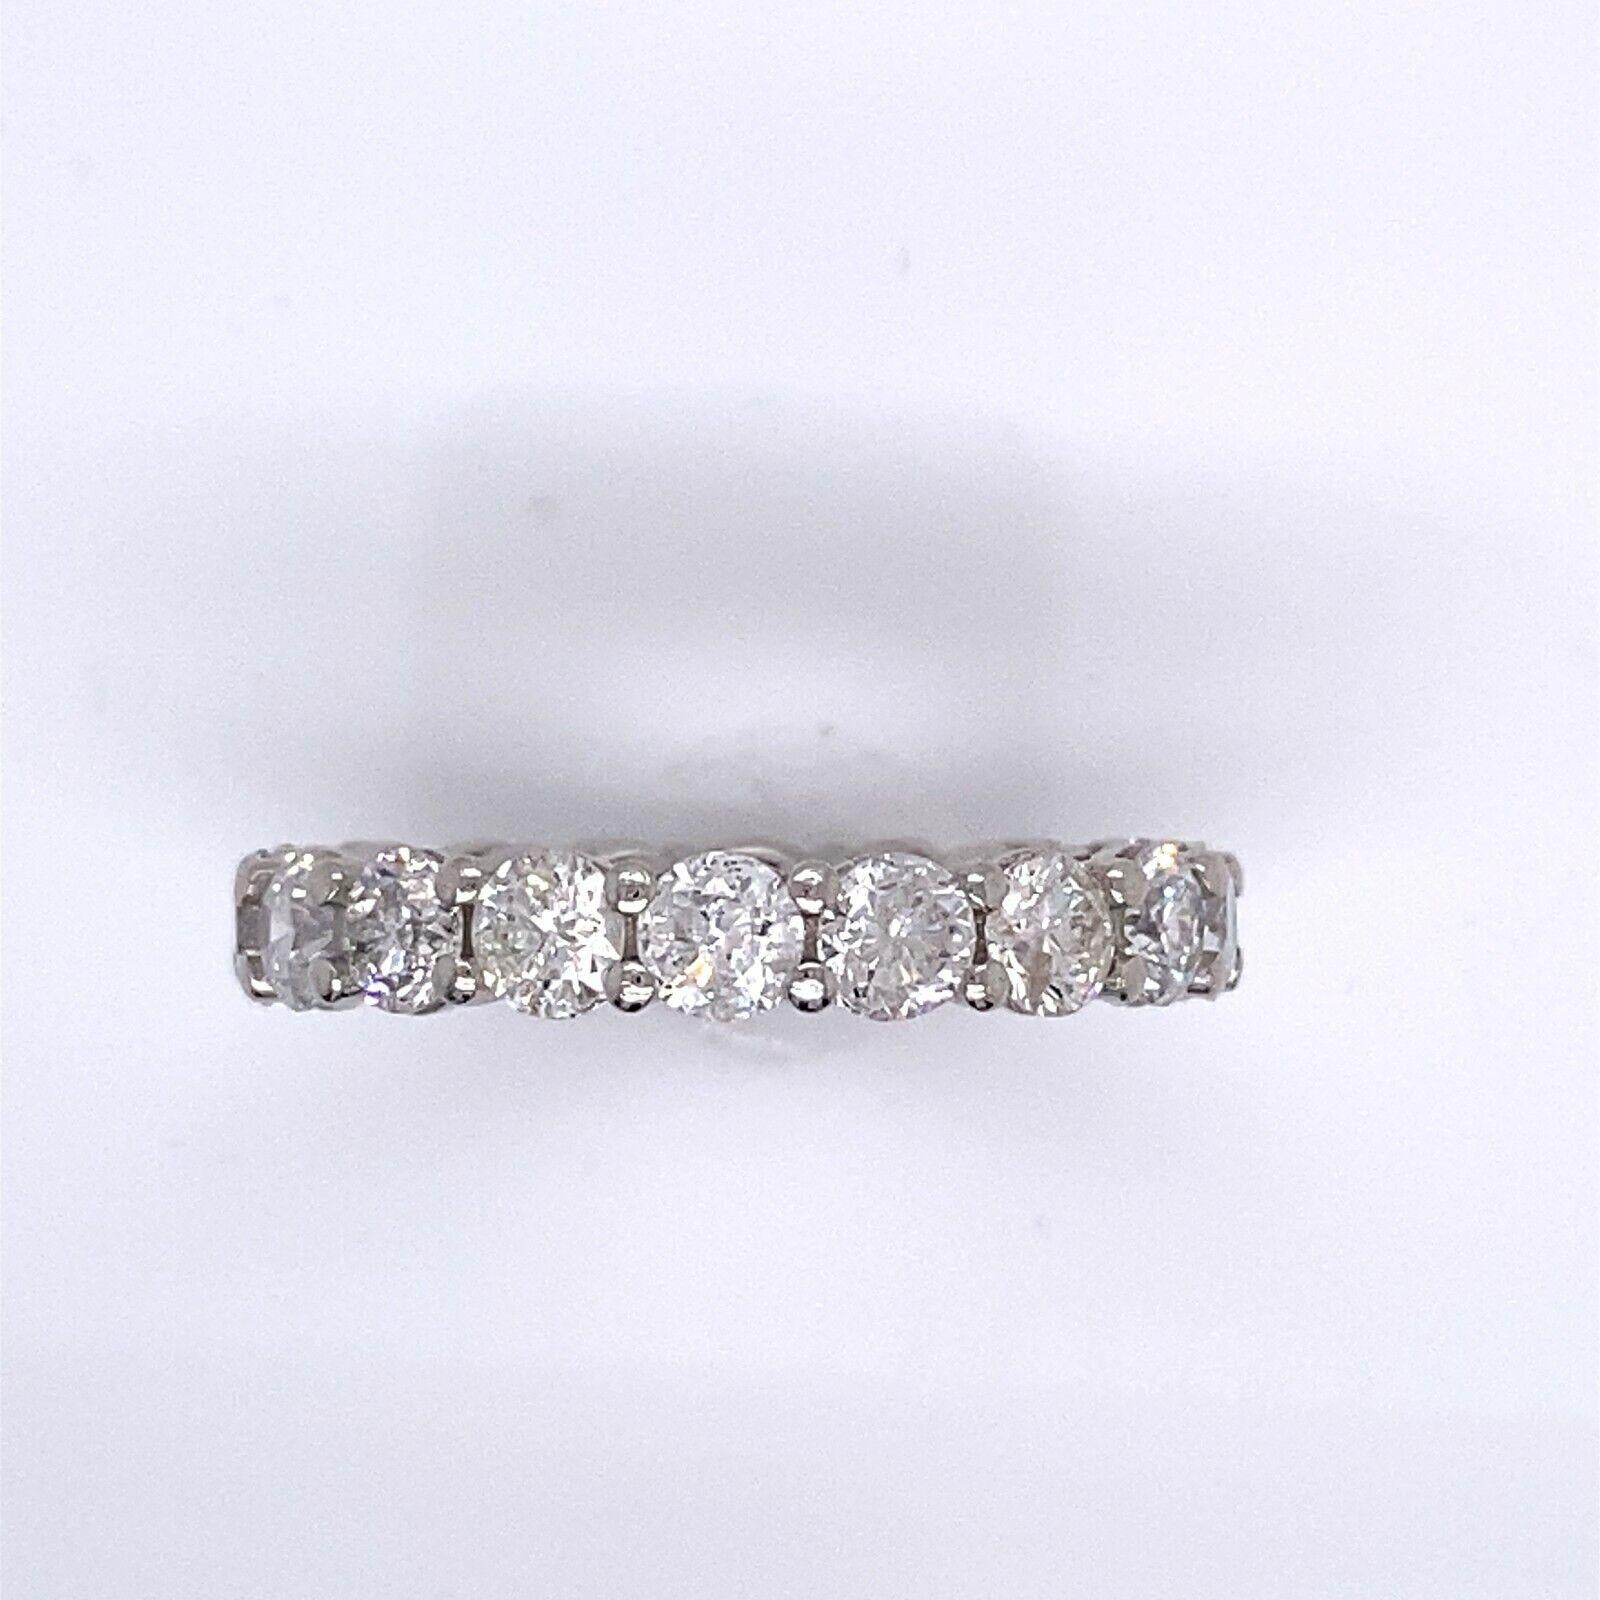 Women's New Platinum Full Eternity Band Ring Set with 3.0ct of Round Diamonds For Sale